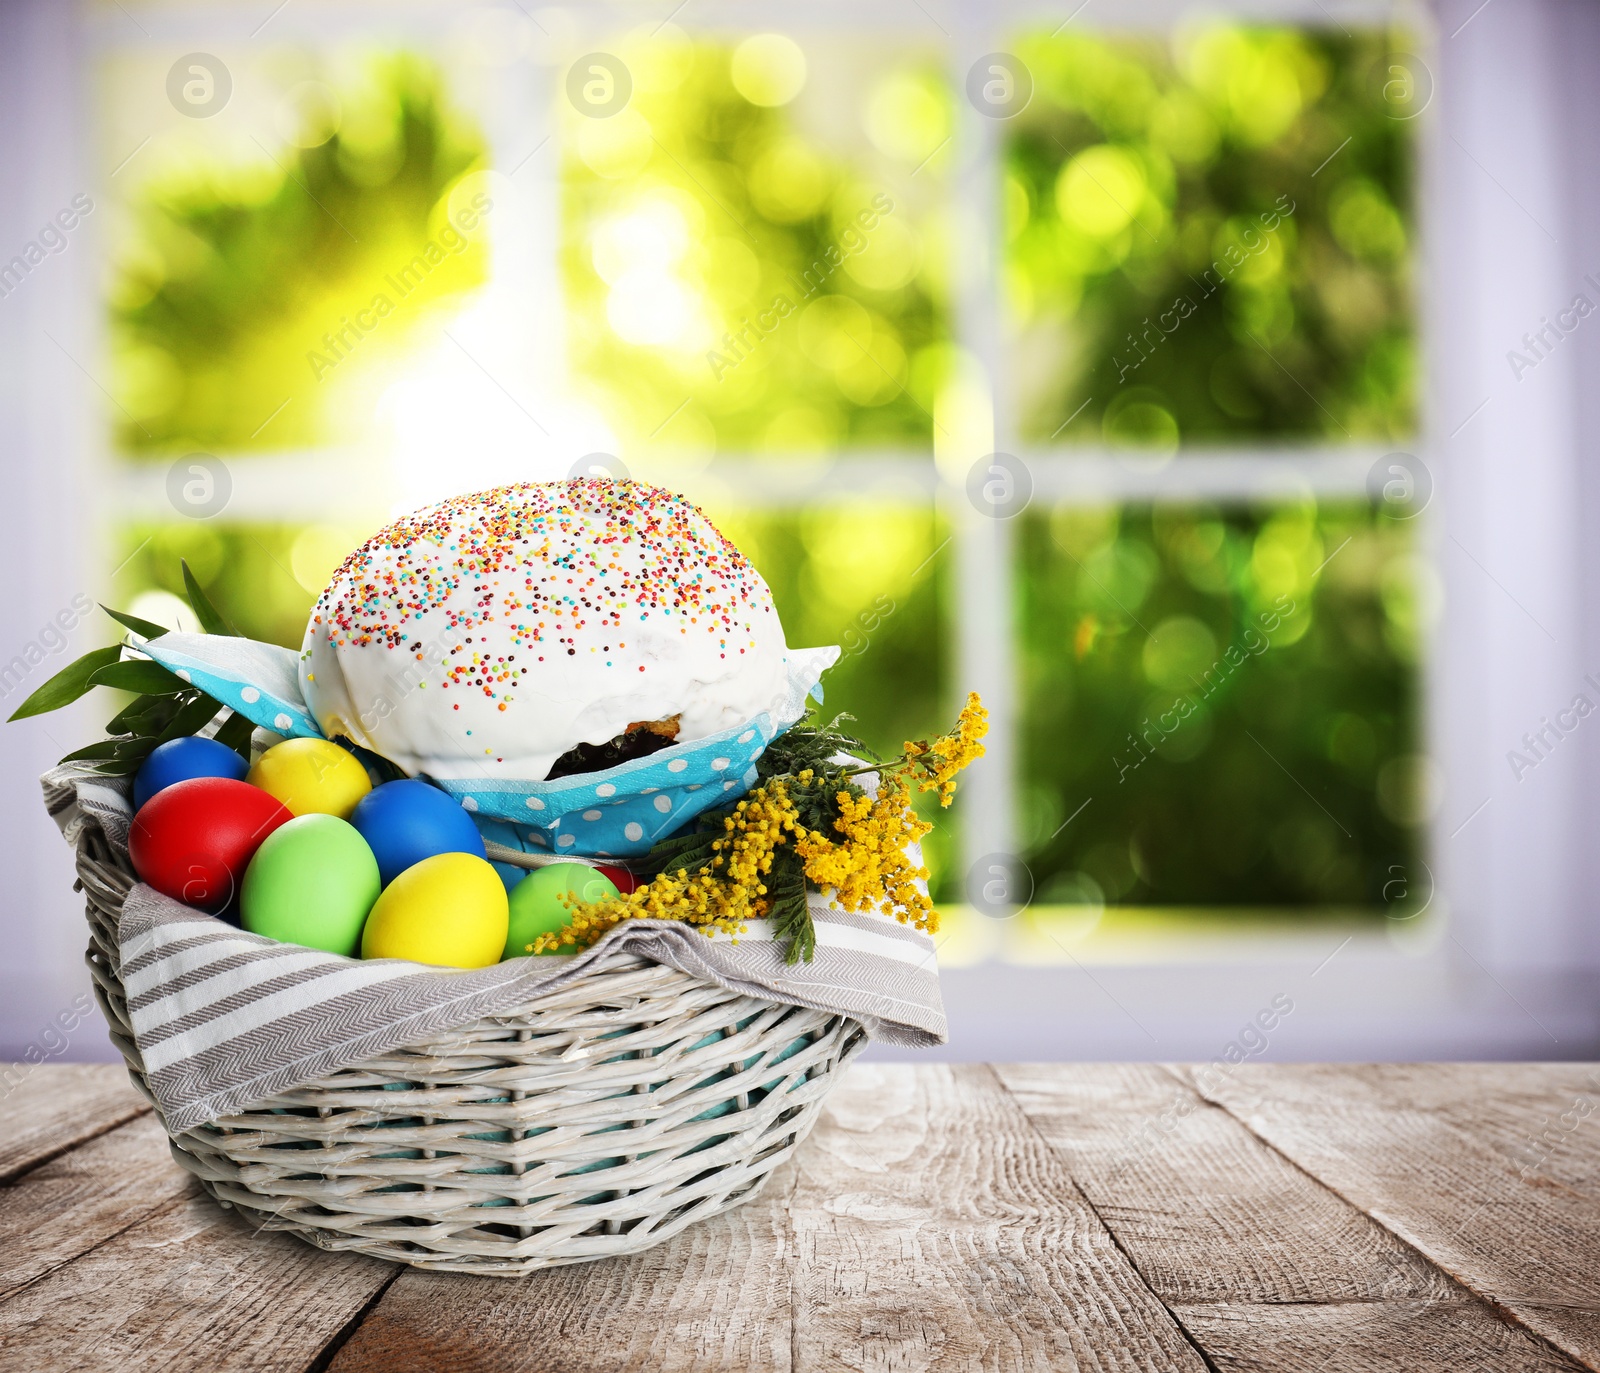 Image of Basket with delicious Easter cake, dyed eggs and flowers on wooden table indoors. Space for text